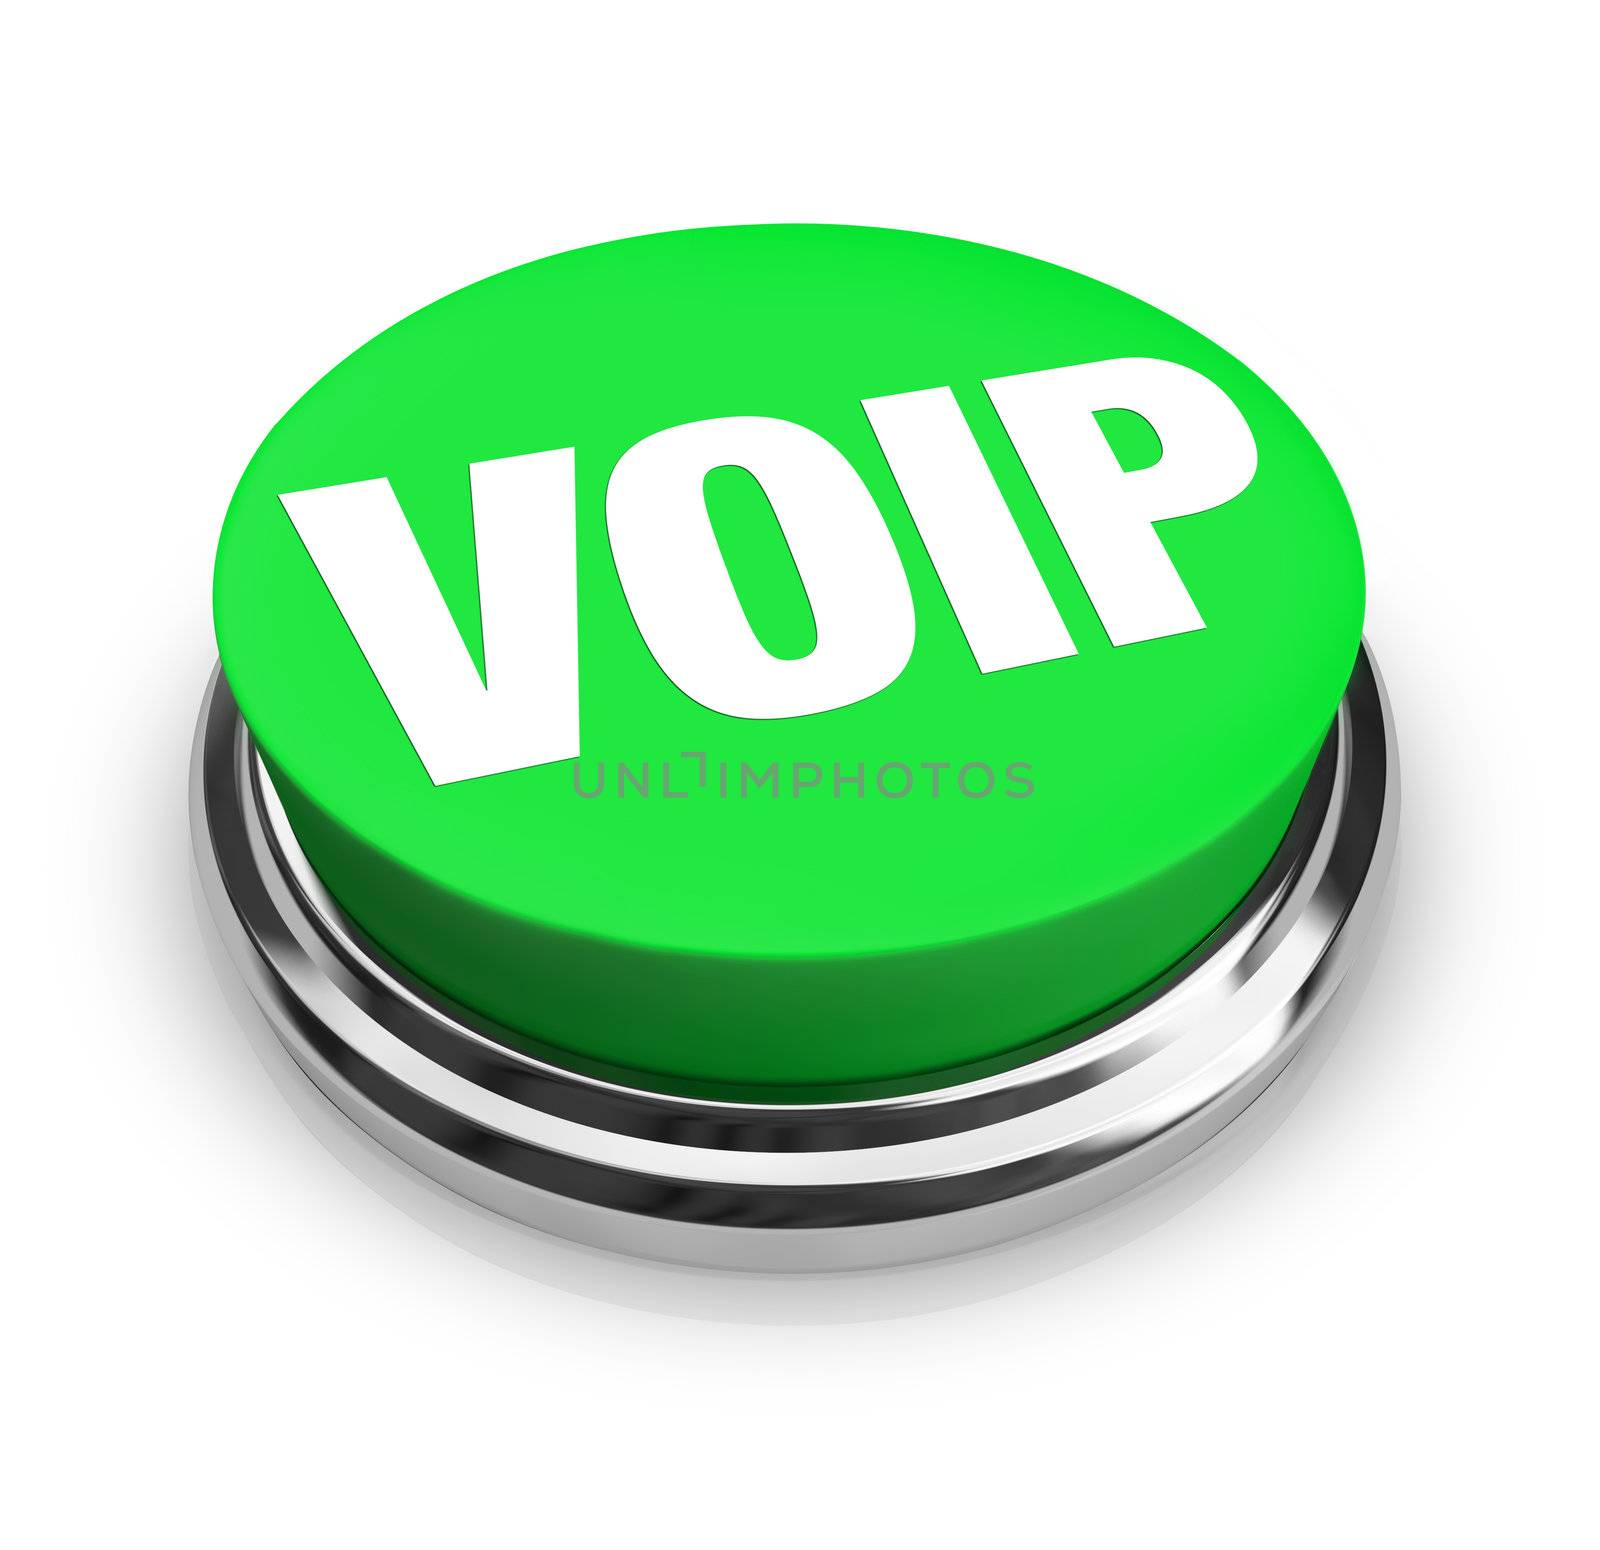 VOIP Word or Acronym on Green Round Button by iQoncept